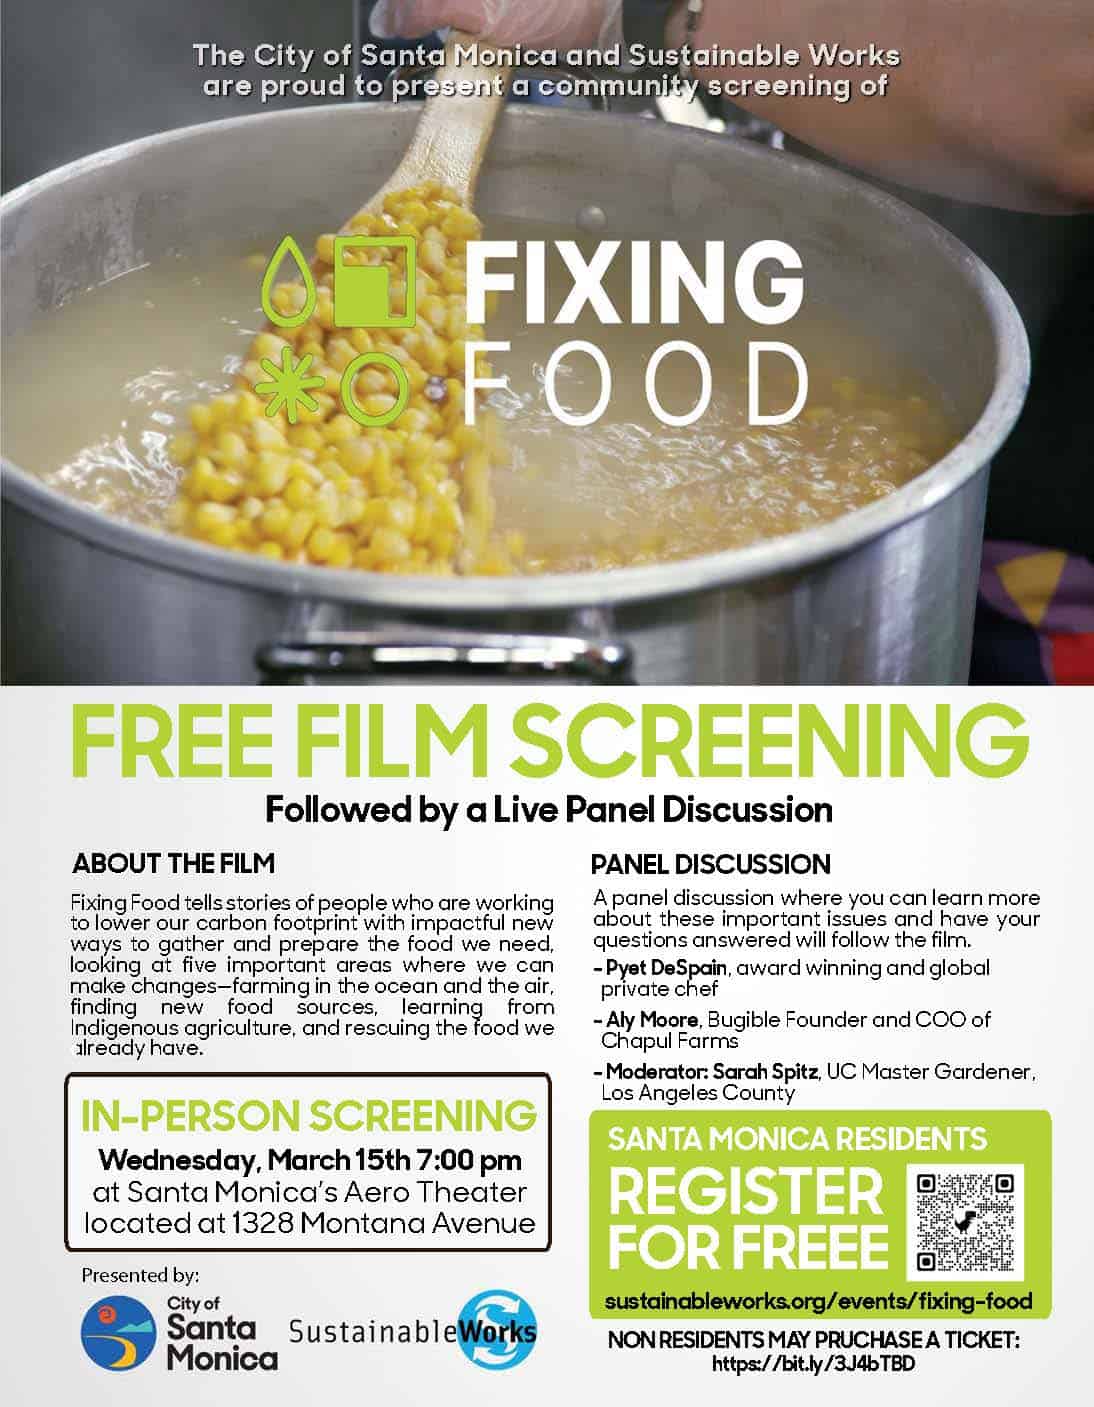 Fixing Food Film Screening and Panel Discussion